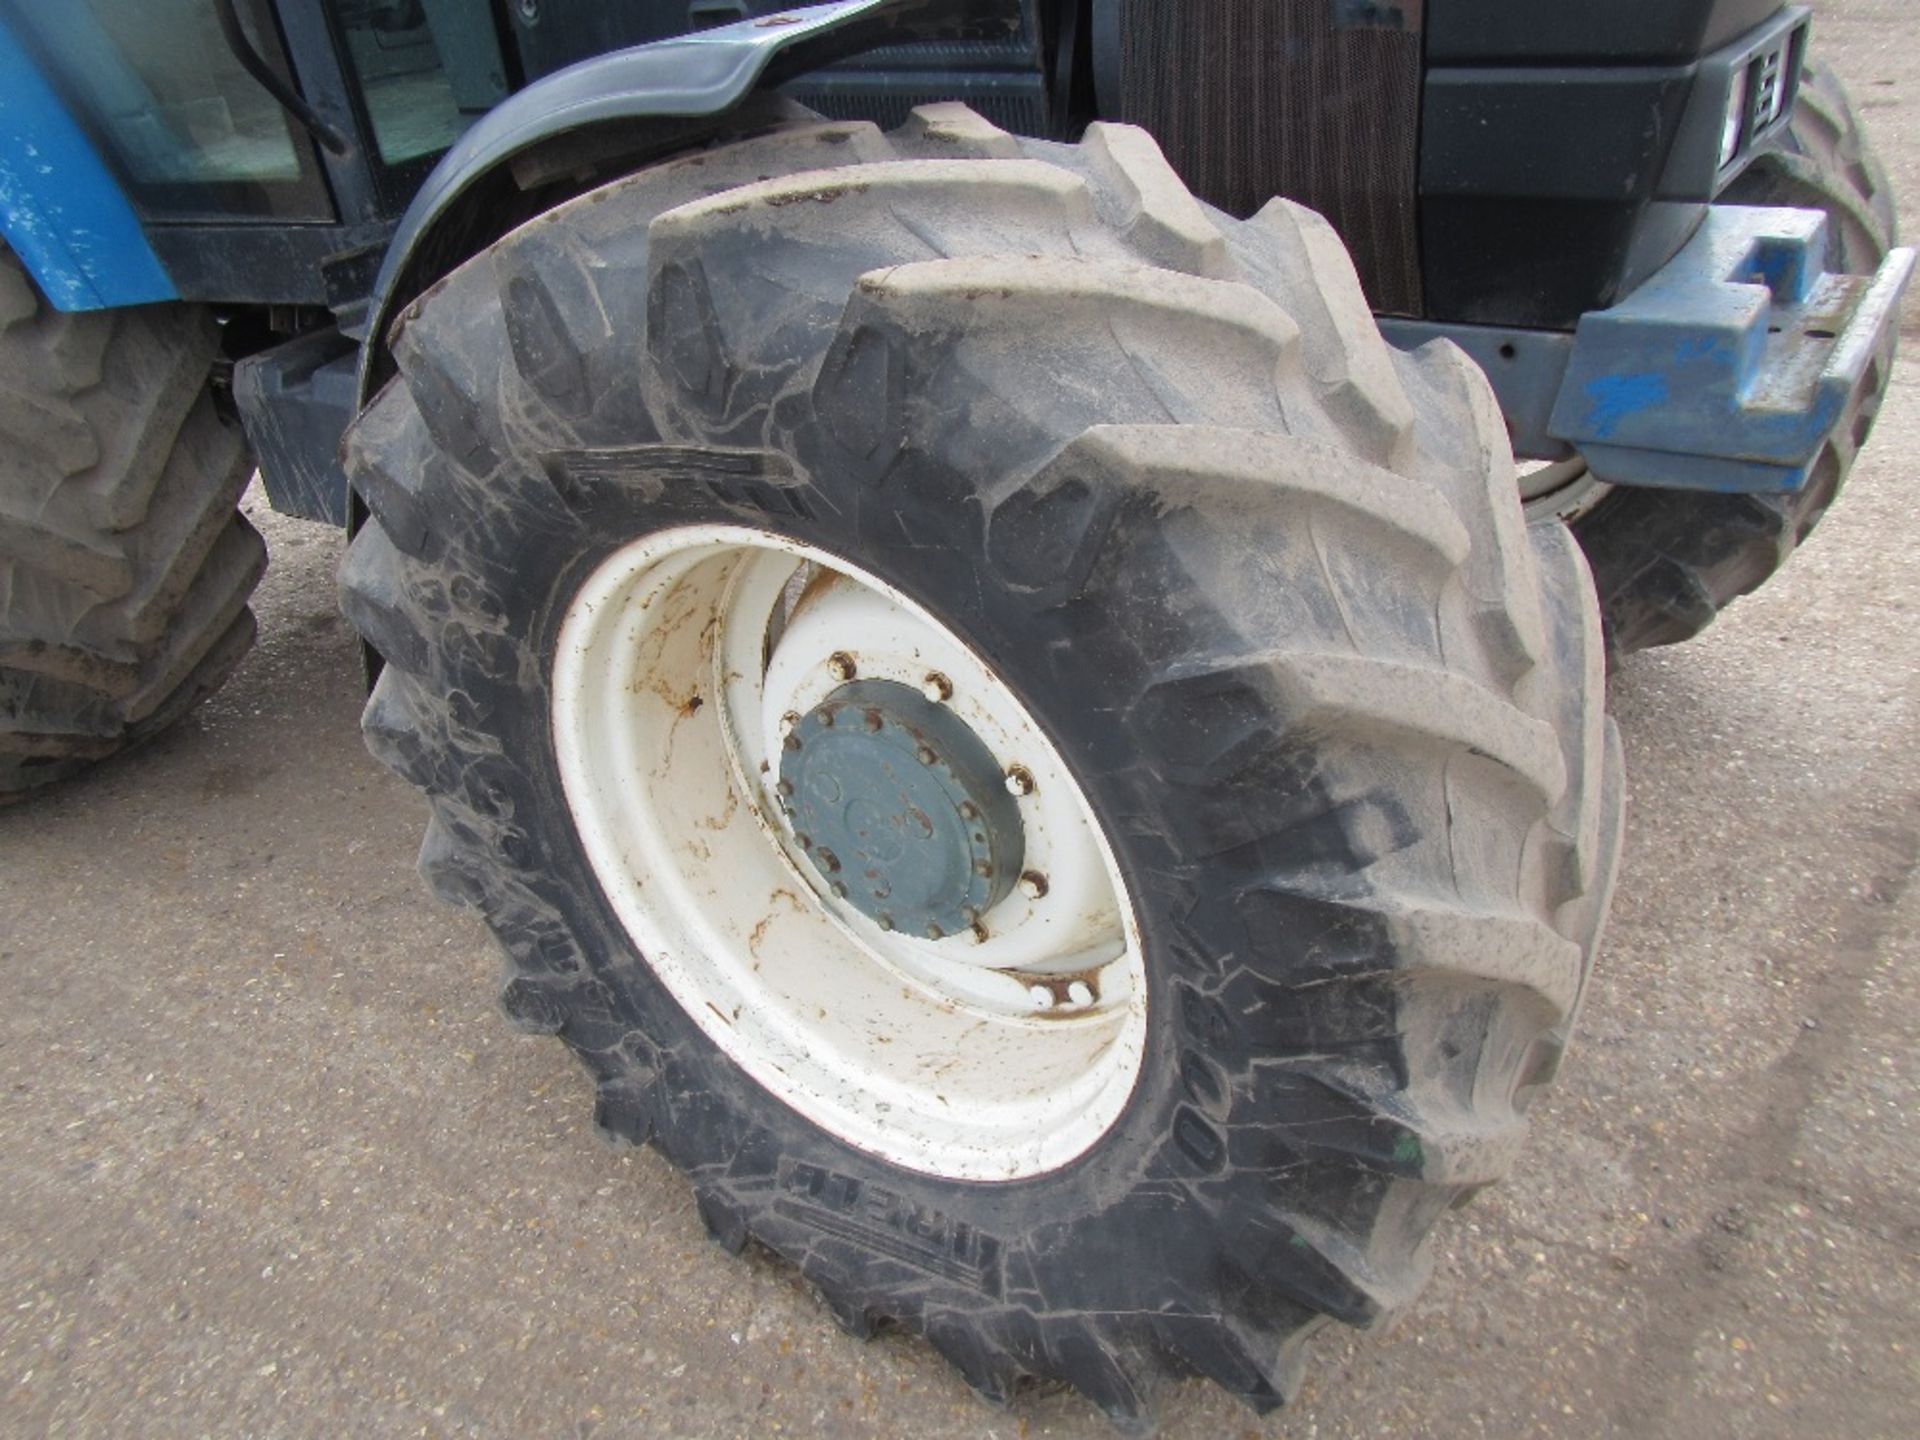 New Holland 8340 SLE 4wd Tractor. V5 will be supplied Reg. No. N243 SCN Ser. No. 025324B - Image 4 of 18